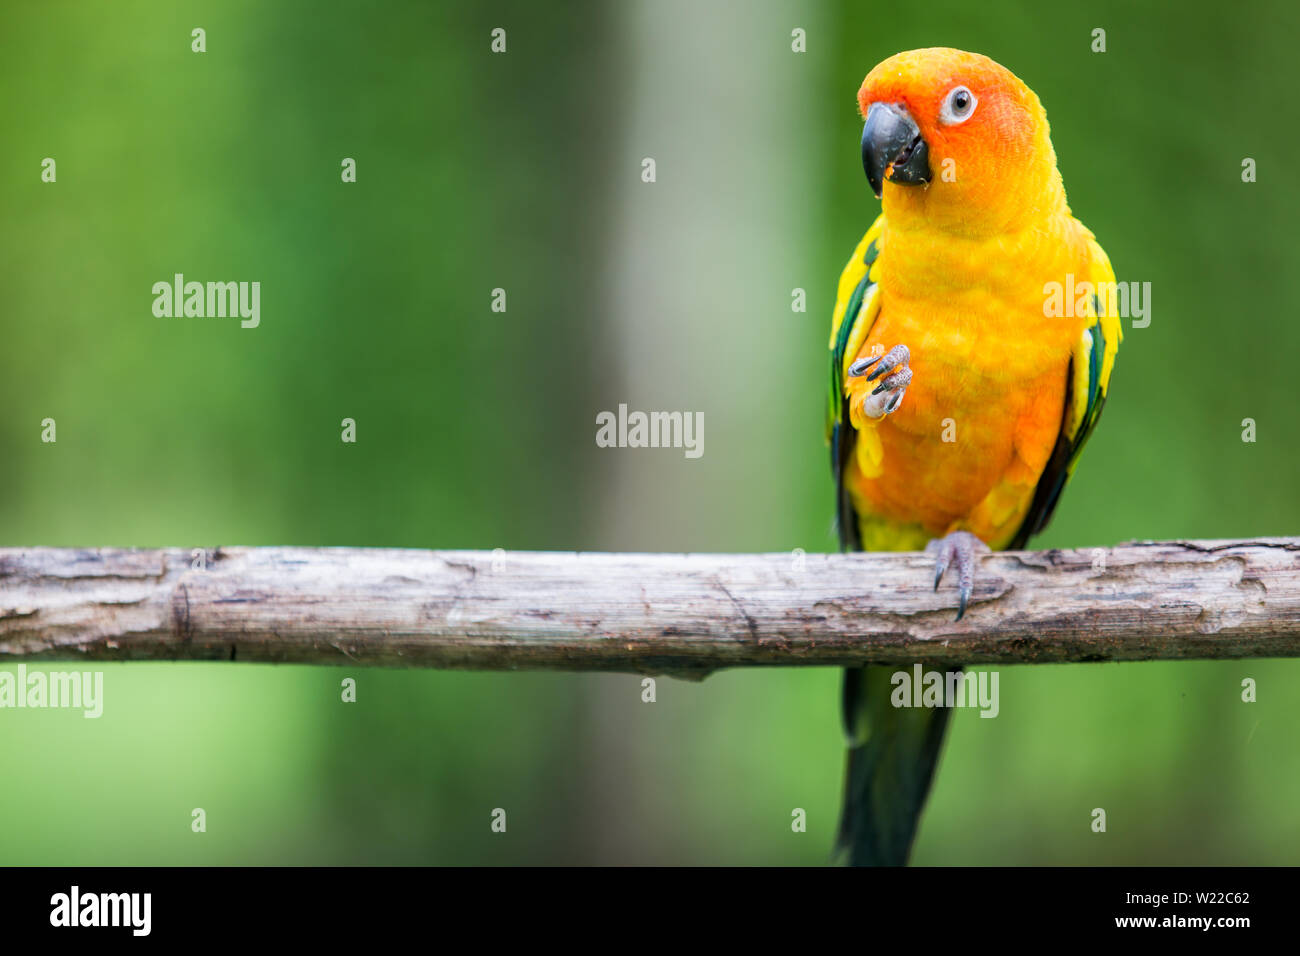 Colorful yellow parrot, Sun Conure (Aratinga solstitialis), standing on the branch Stock Photo